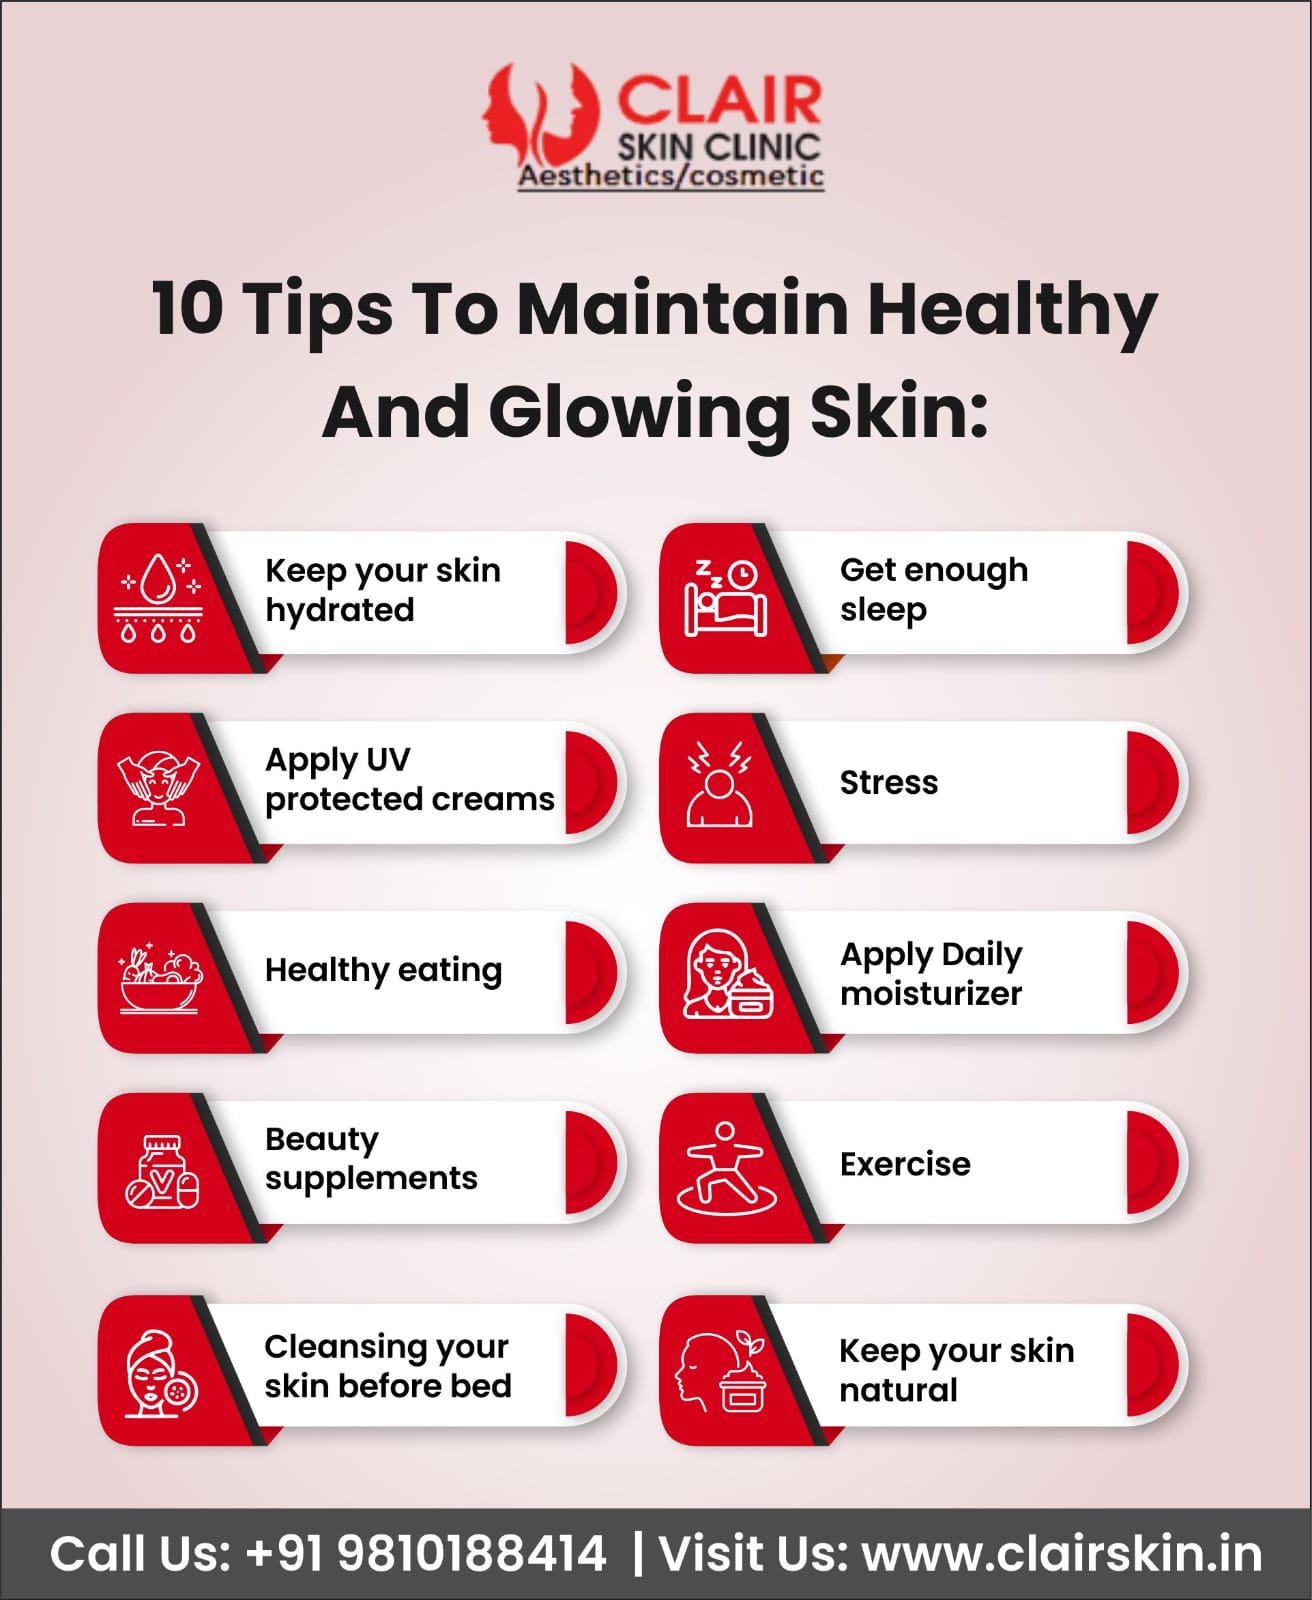 Top 10 Secret Tips To Maintain Healthy And Glowing Skin